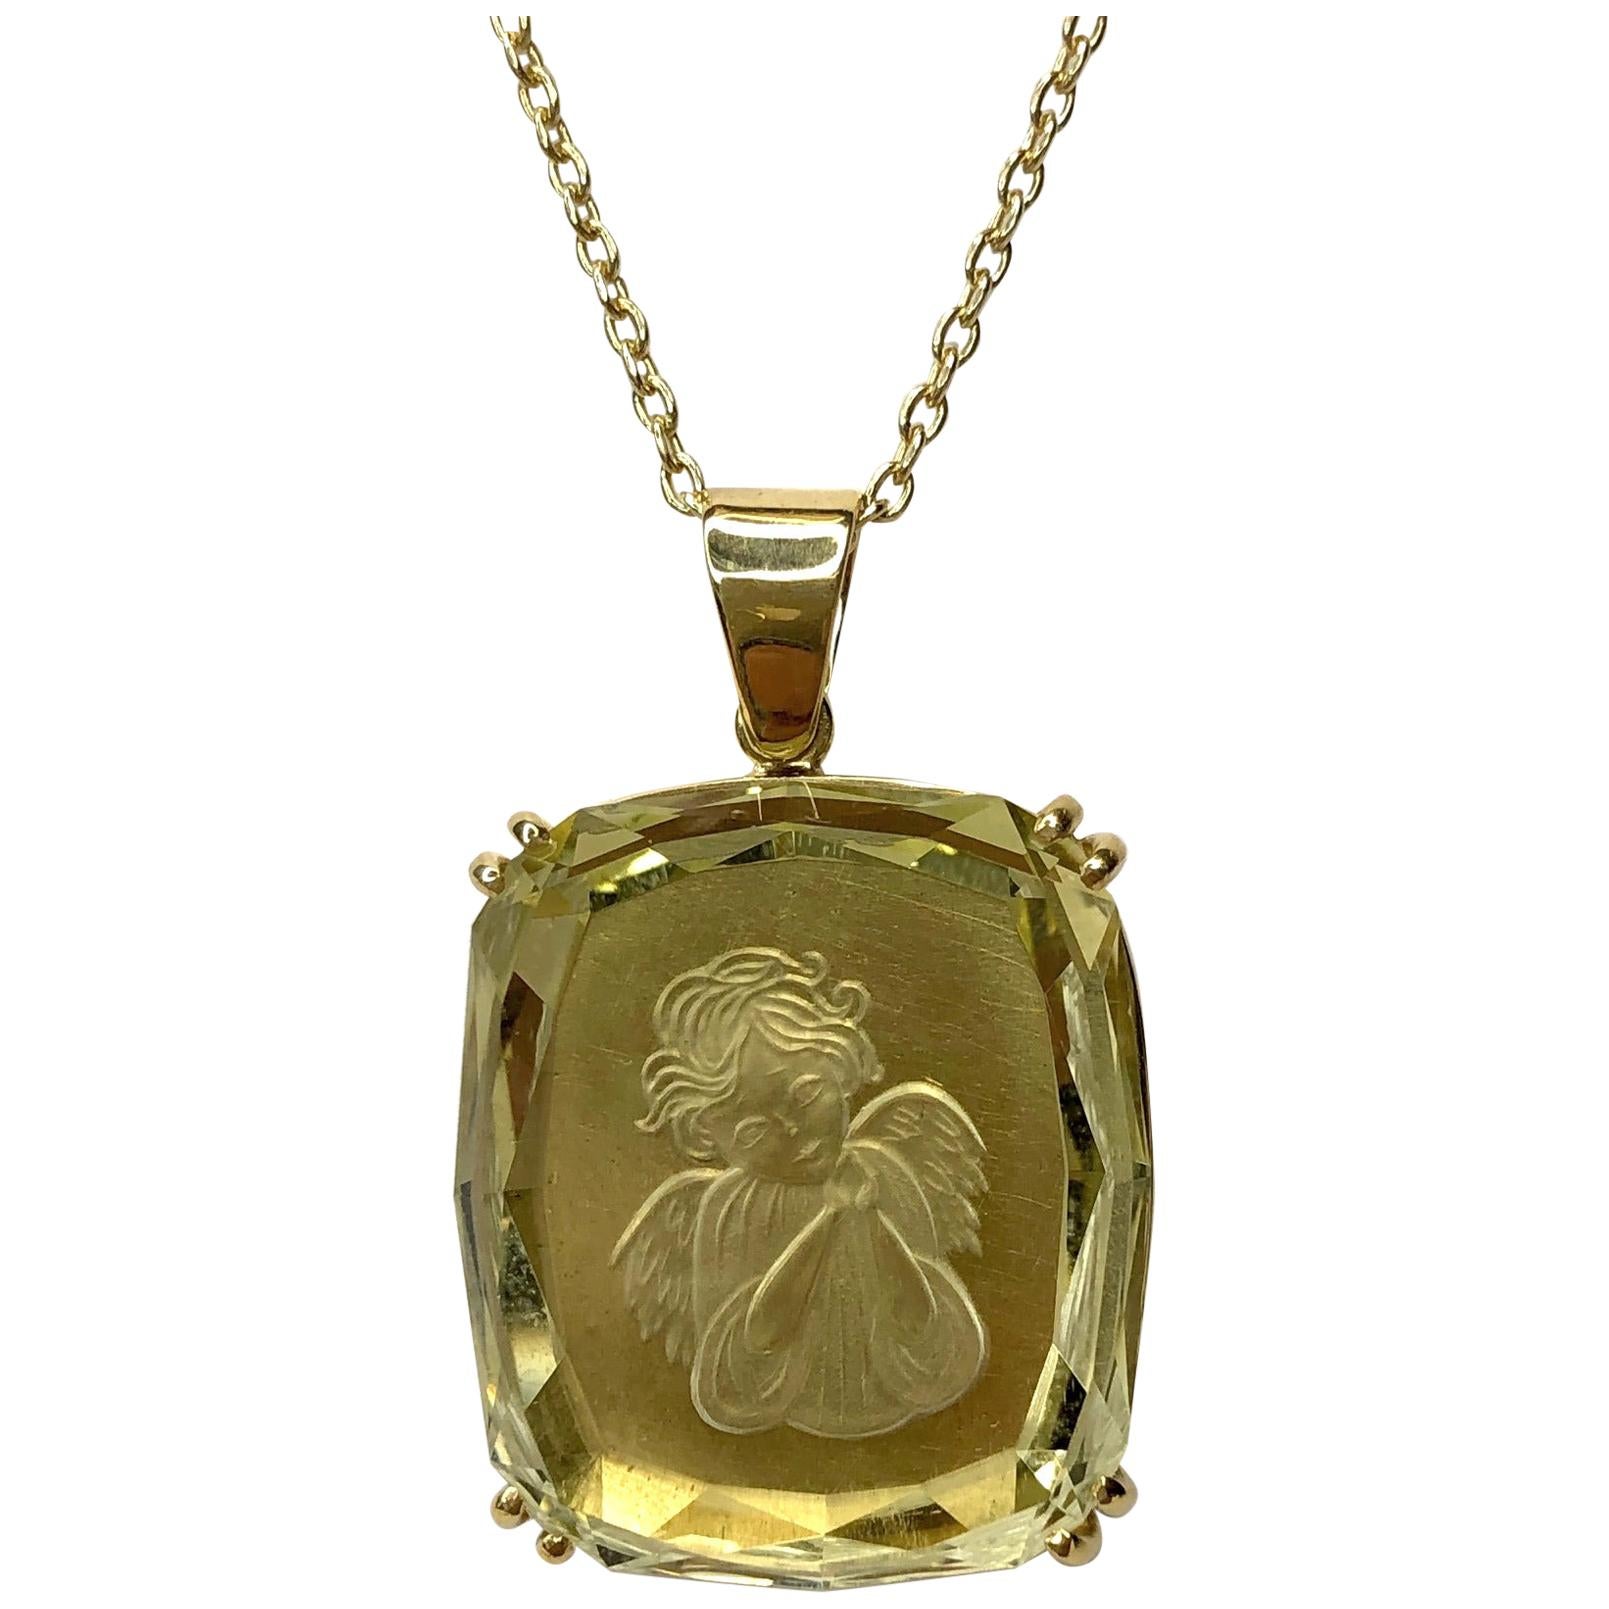 Guardian Angel Intaglio Pendant, 25.49 Carat Carved Golden Beryl in Yellow Gold